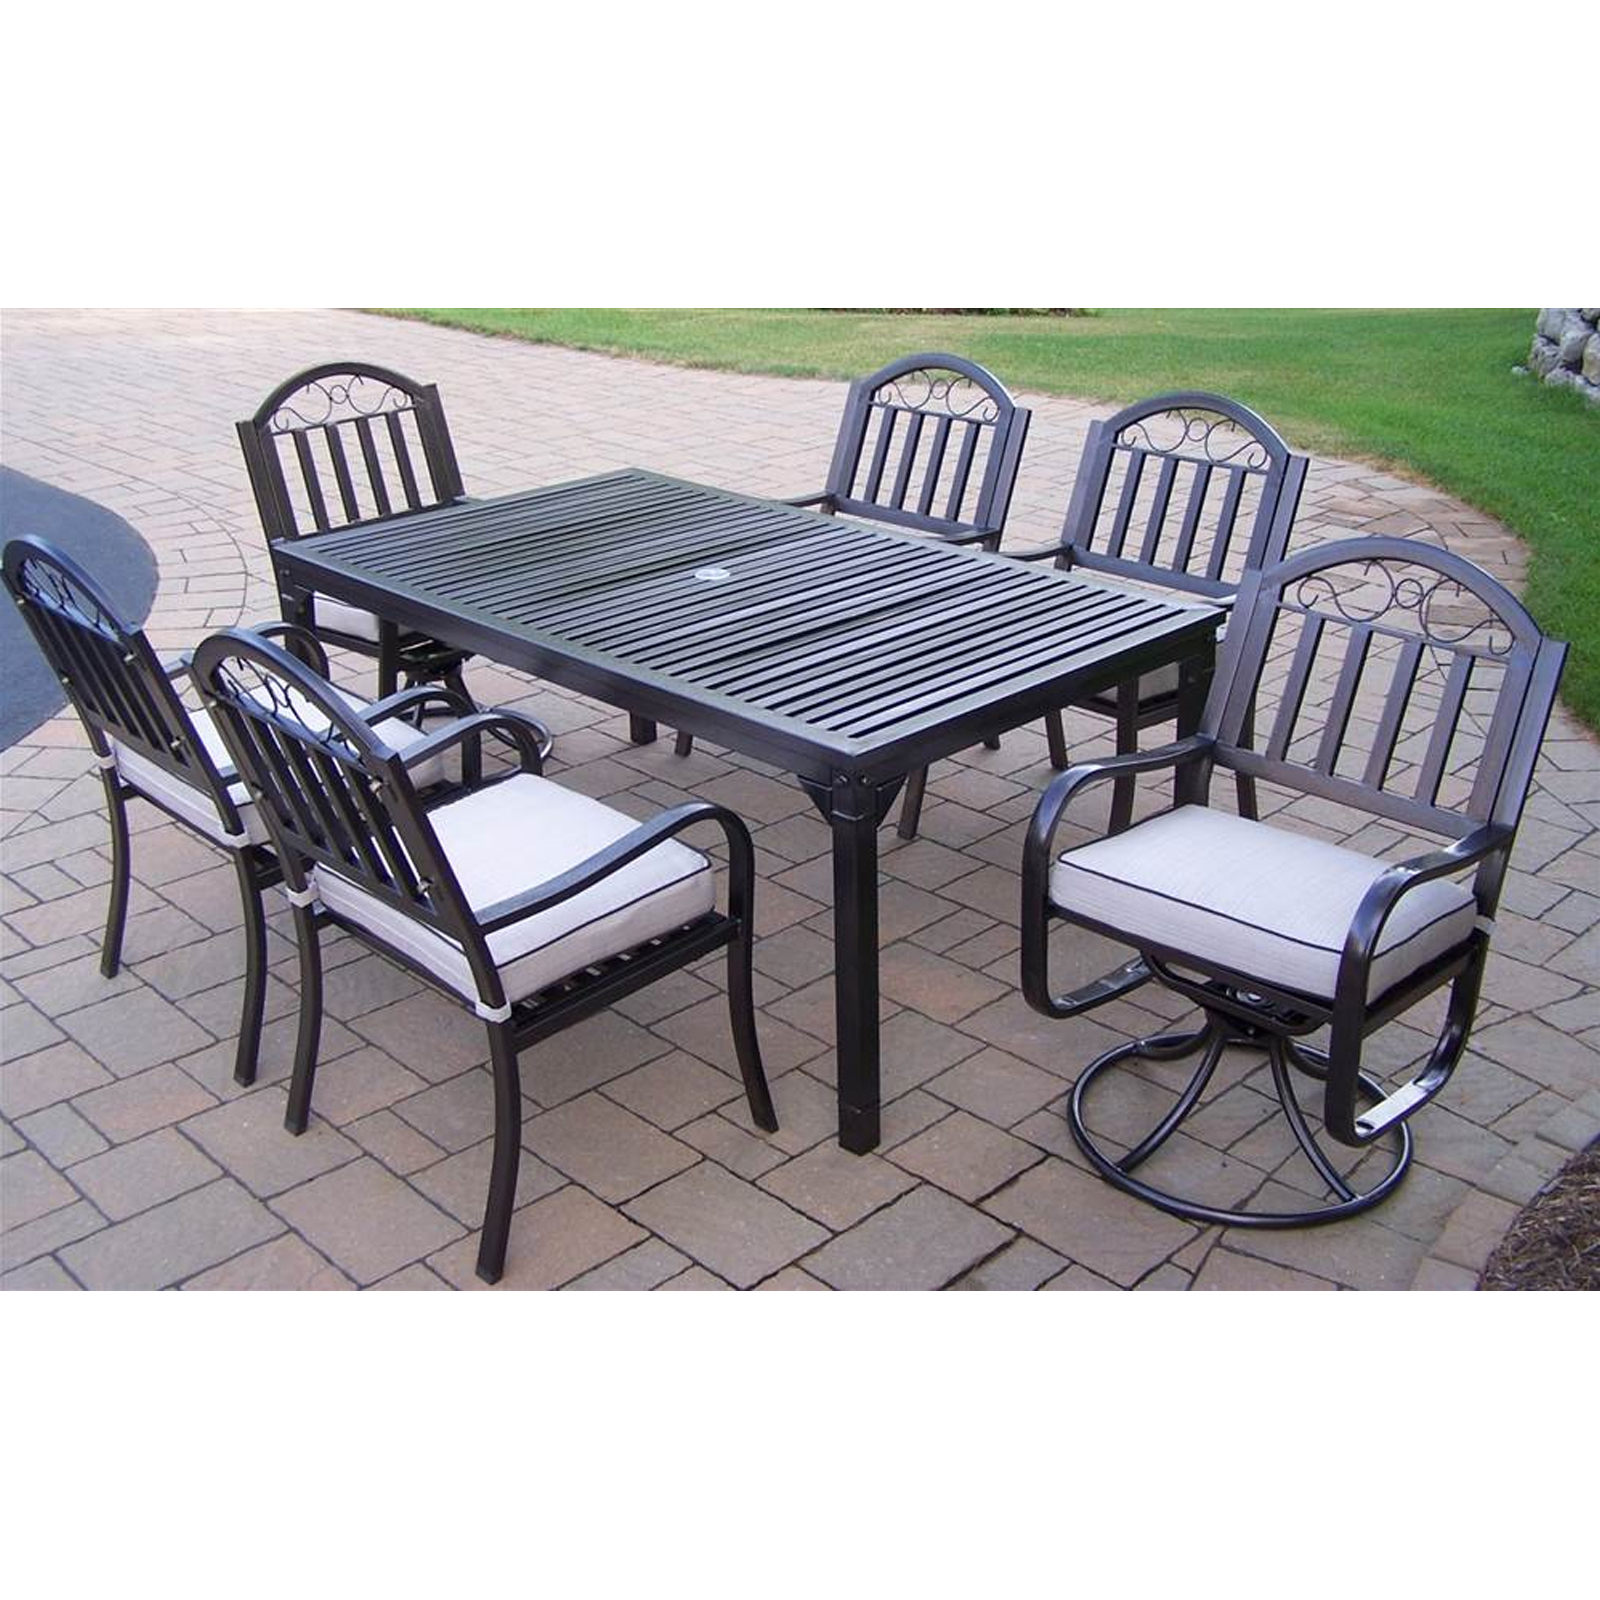 Oakland Living Rochester 7pc. Iron Outdoor Dining Set with Cushions - Bronze